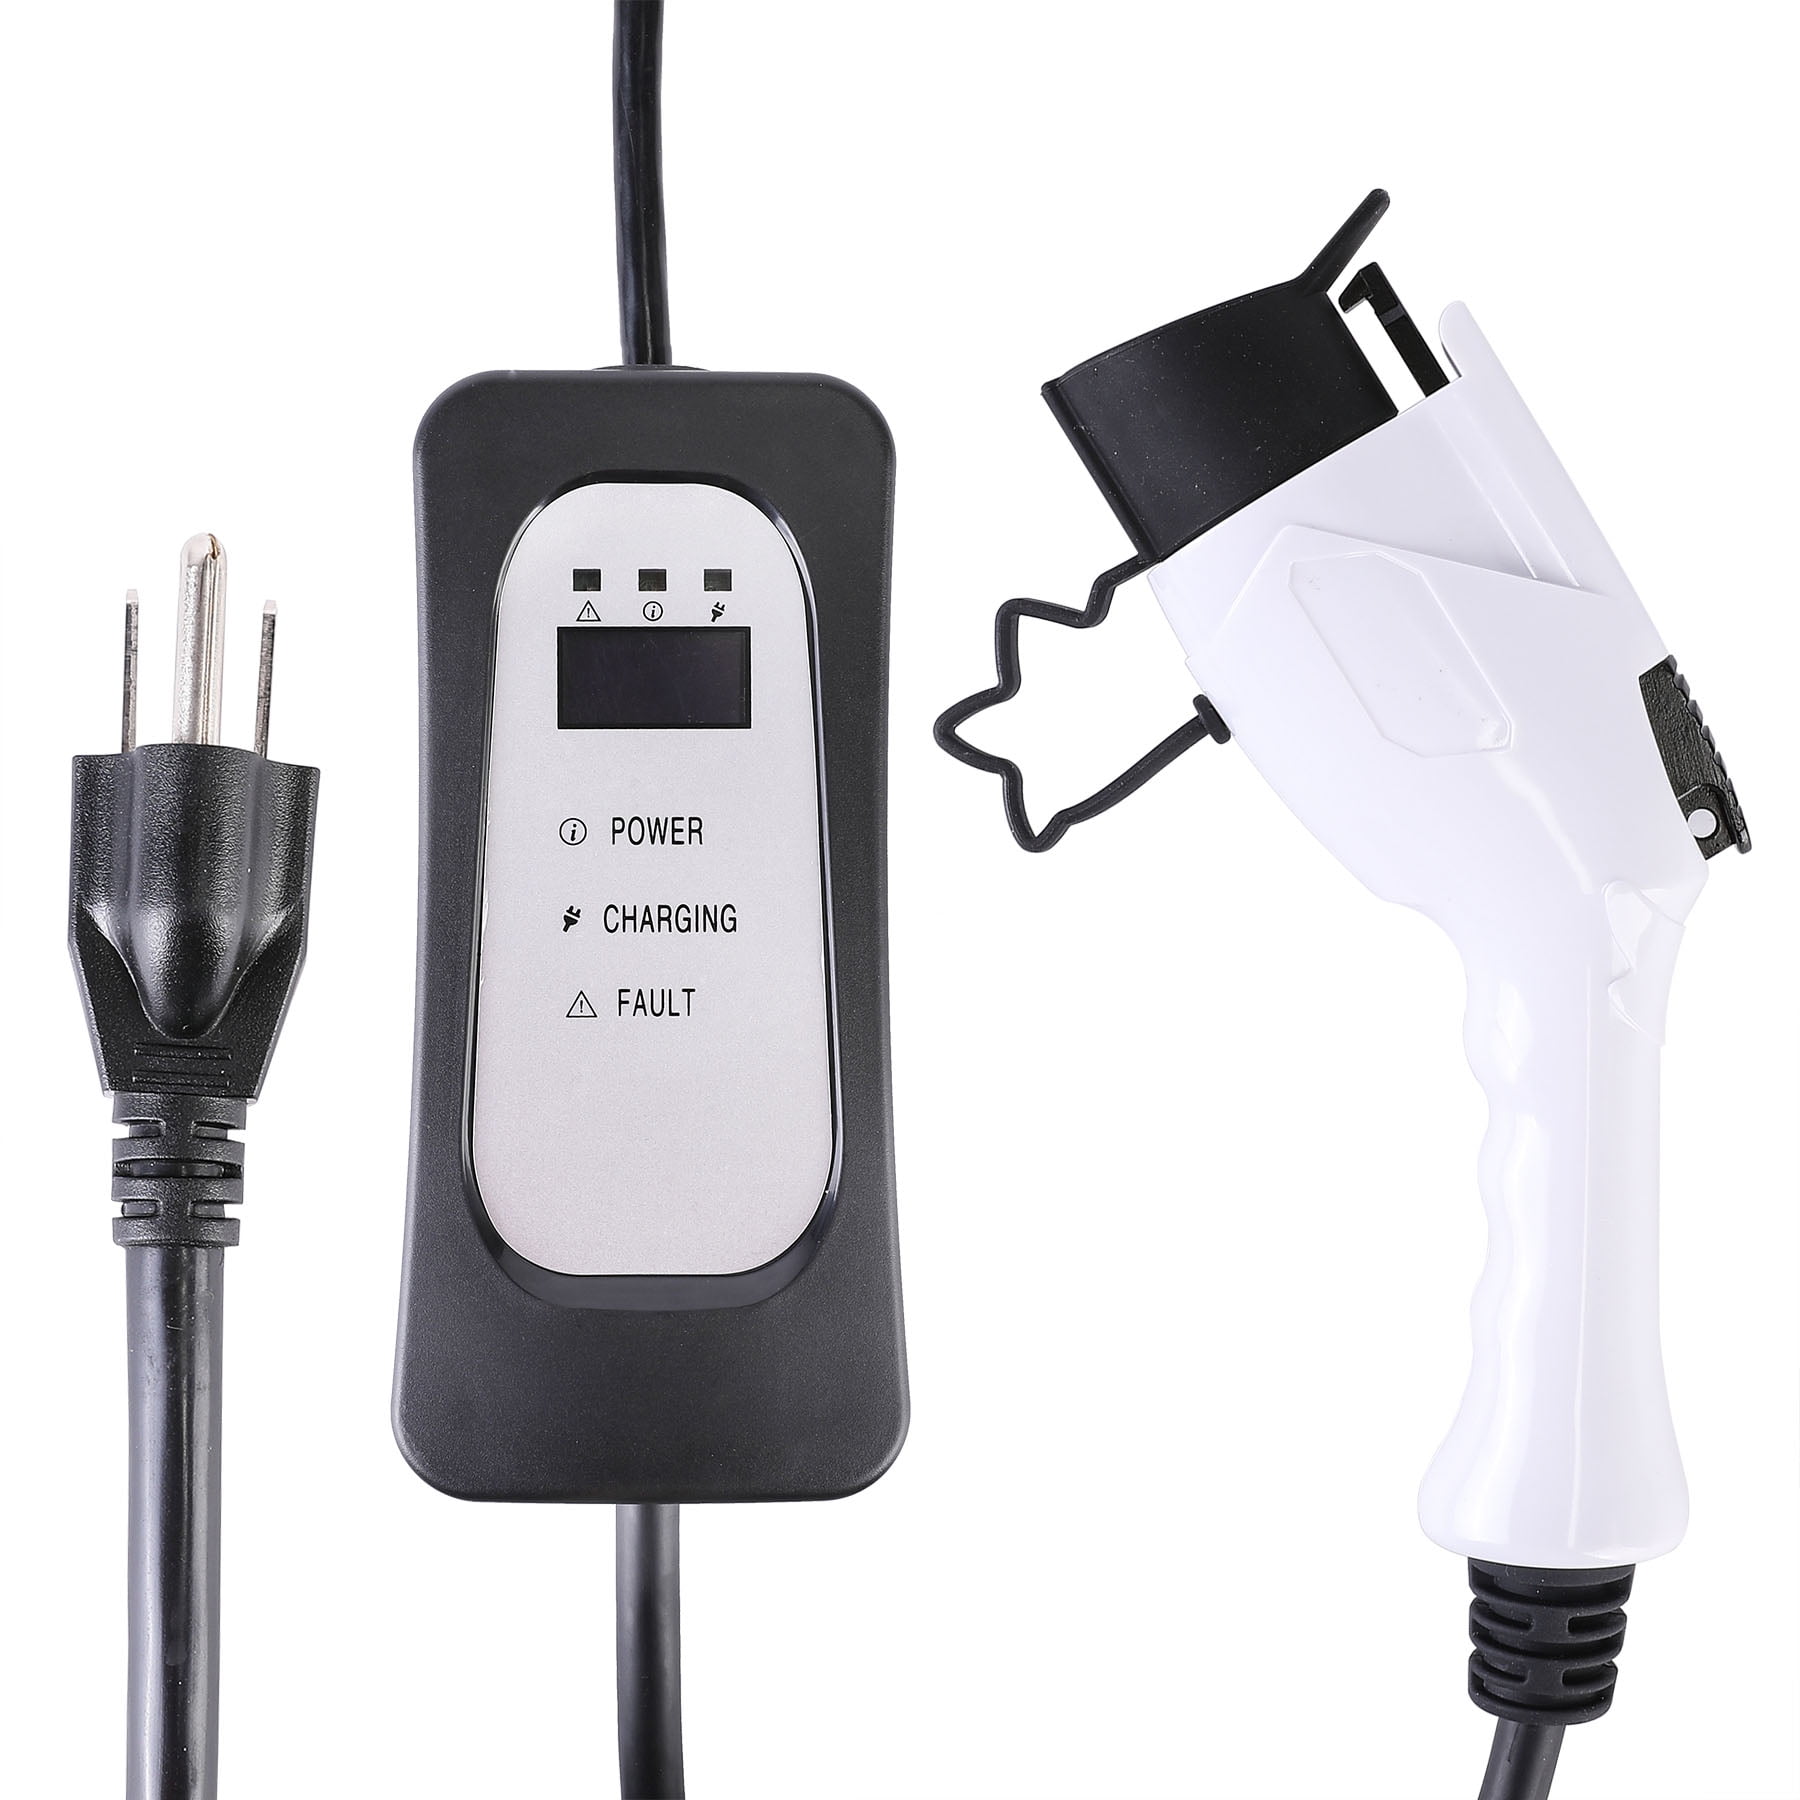 Level 1 Electric Car EV Charger (110V-240V 16A), IP54 Waterproof Rating,  16' Cord and Heavy Duty Electric Cable Plug Adapter, SAE J1772-EVSE UL